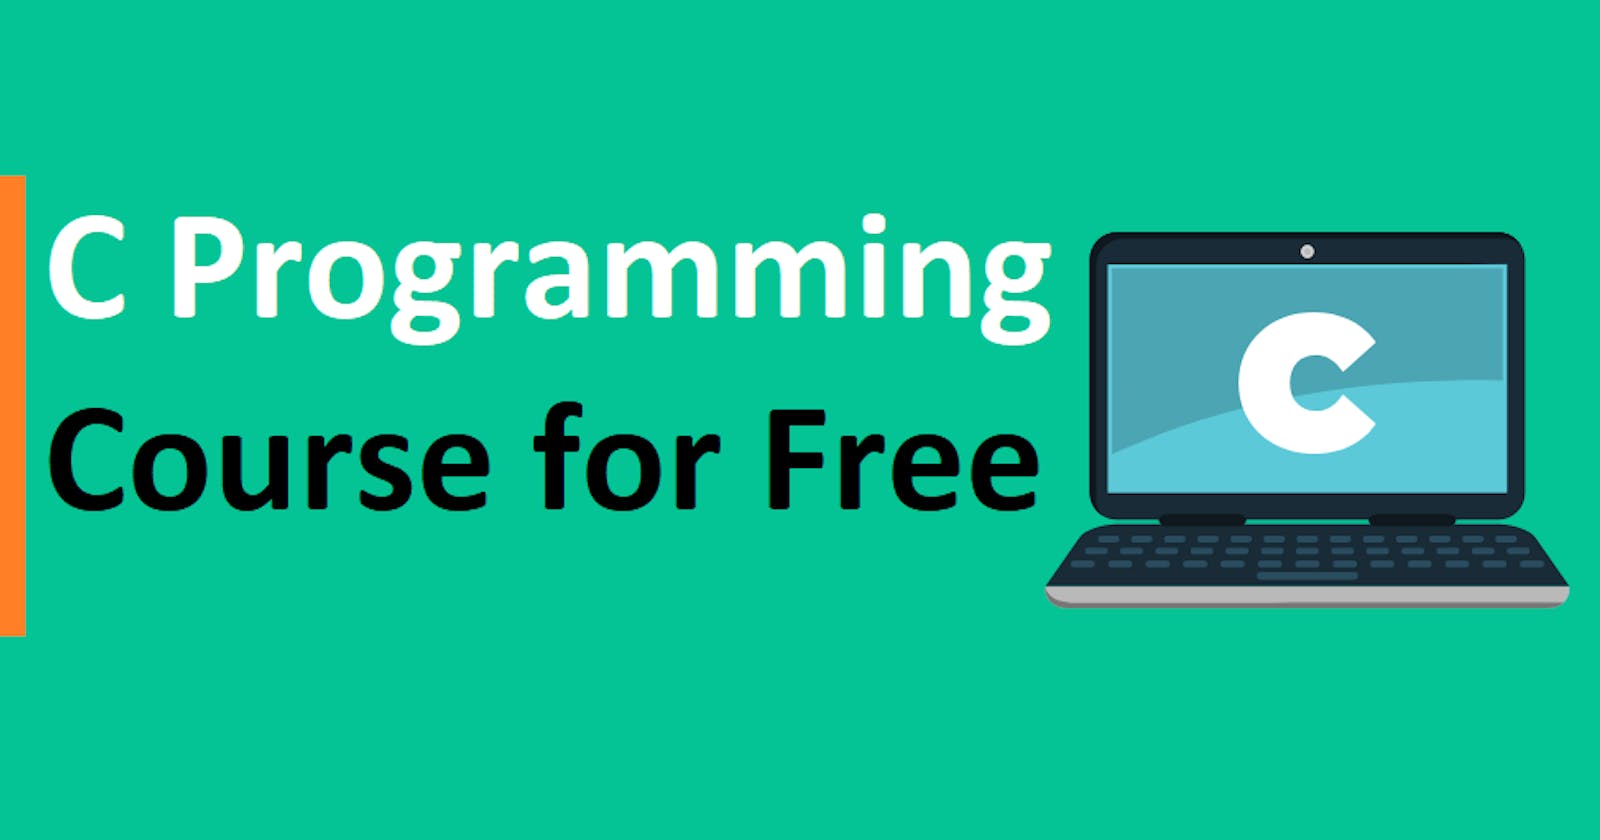 C Programming Course for Free